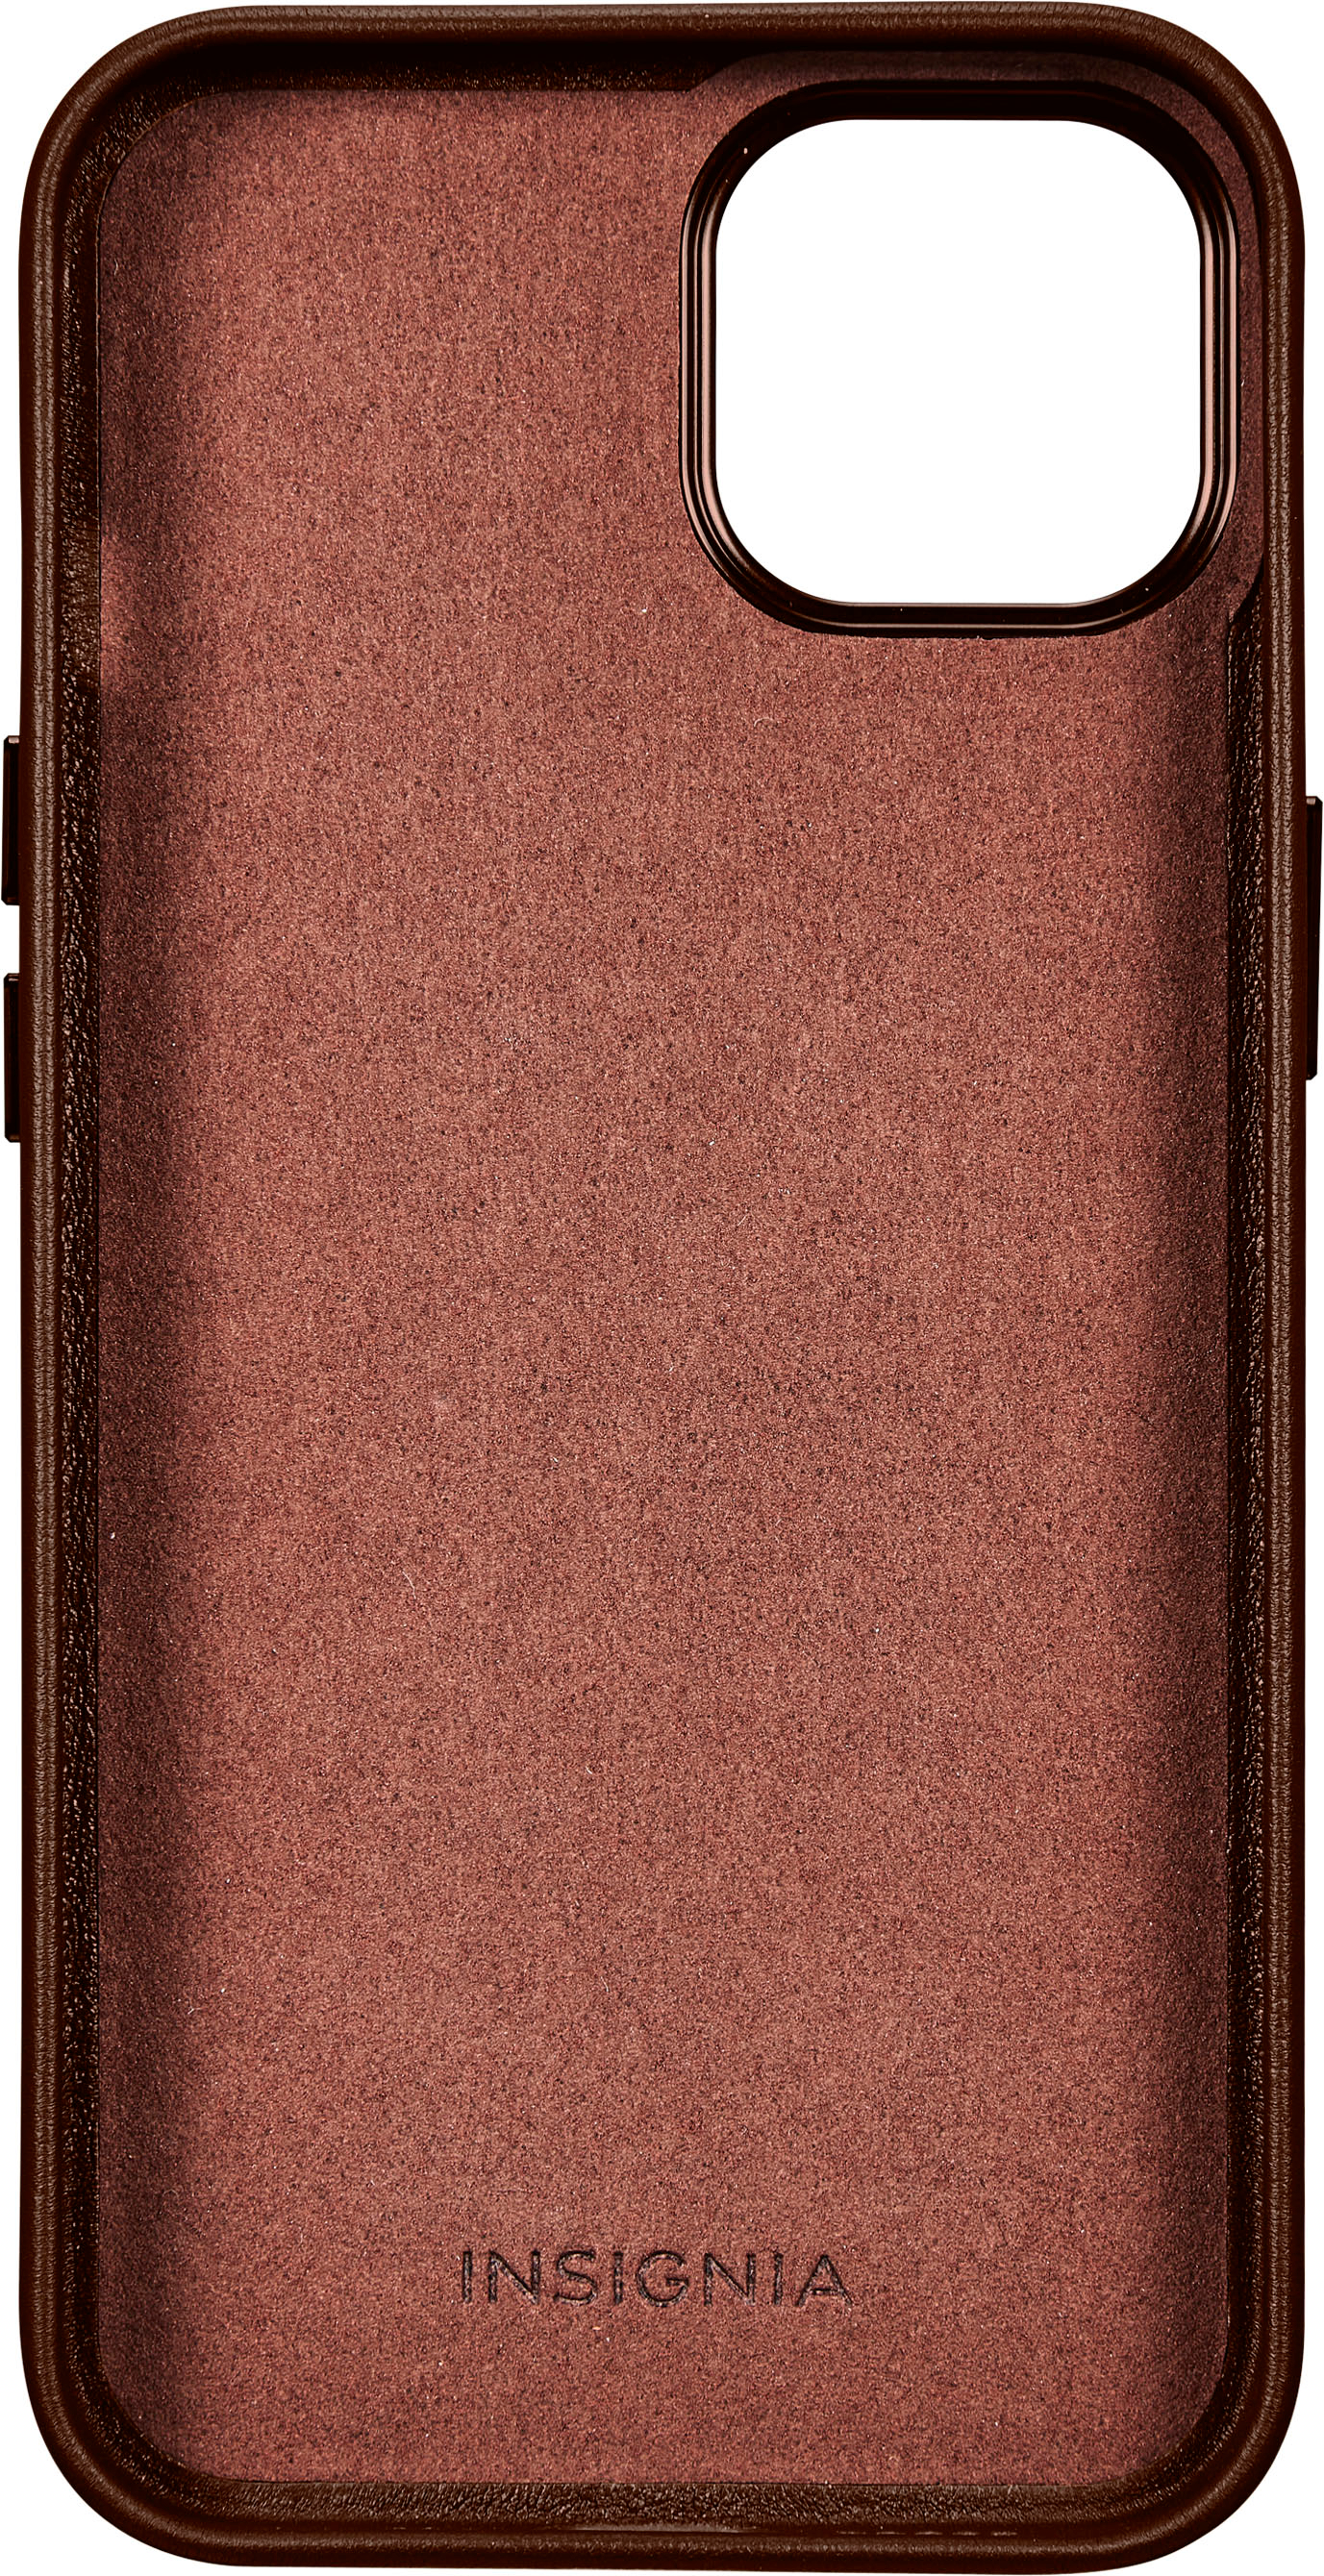 Insignia - Leather Wallet Case for iPhone 14 and iPhone 13 - Bourbon